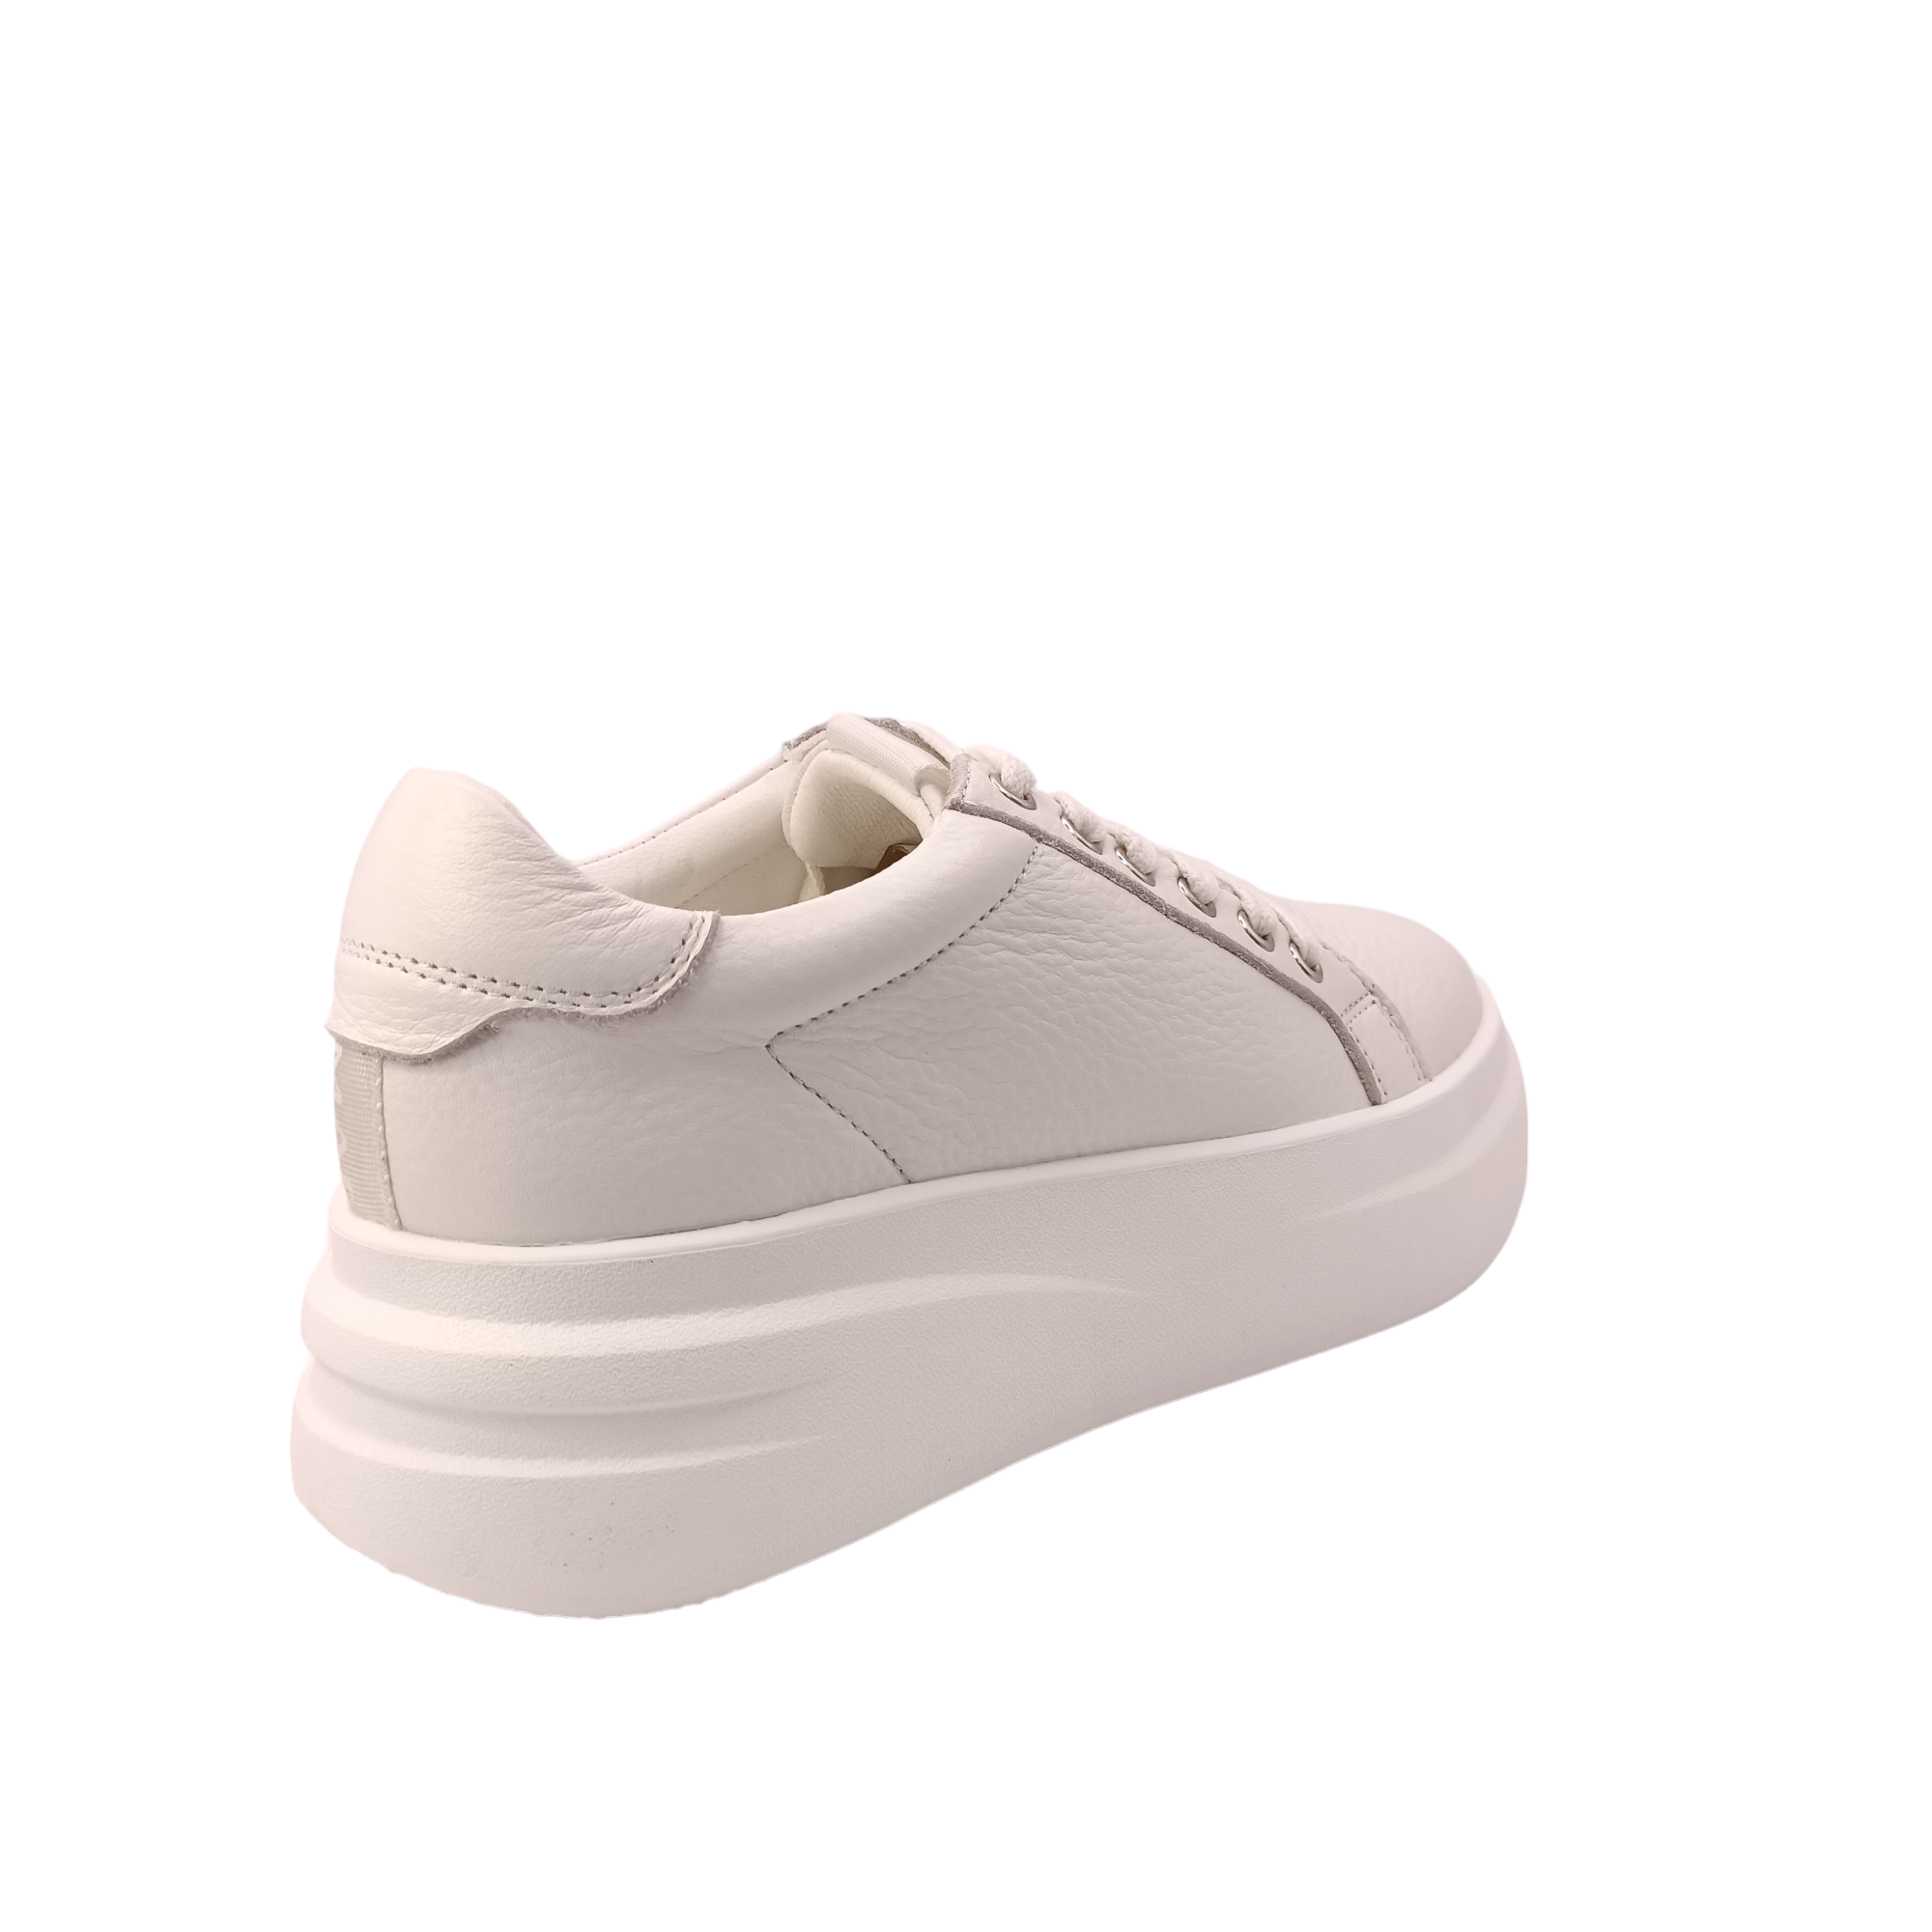 Shop Bailey Tamara London - with shoe&amp;me - from Tamara - General - Sneaker, Winter, Womens - [collection]